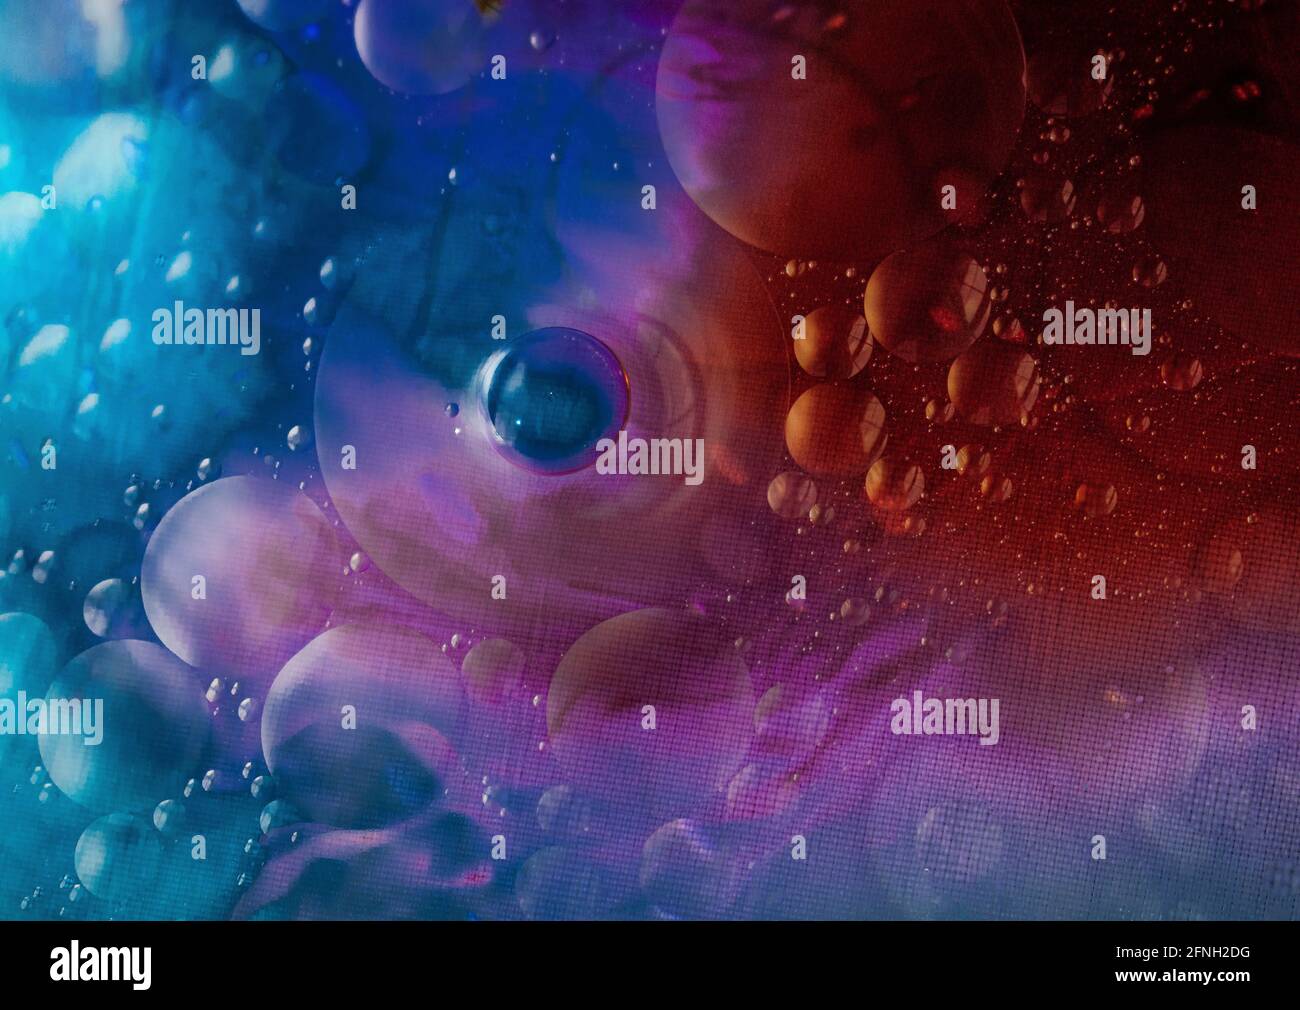 Oil and water agitated to make bubbles with light shining through the liquids Stock Photo